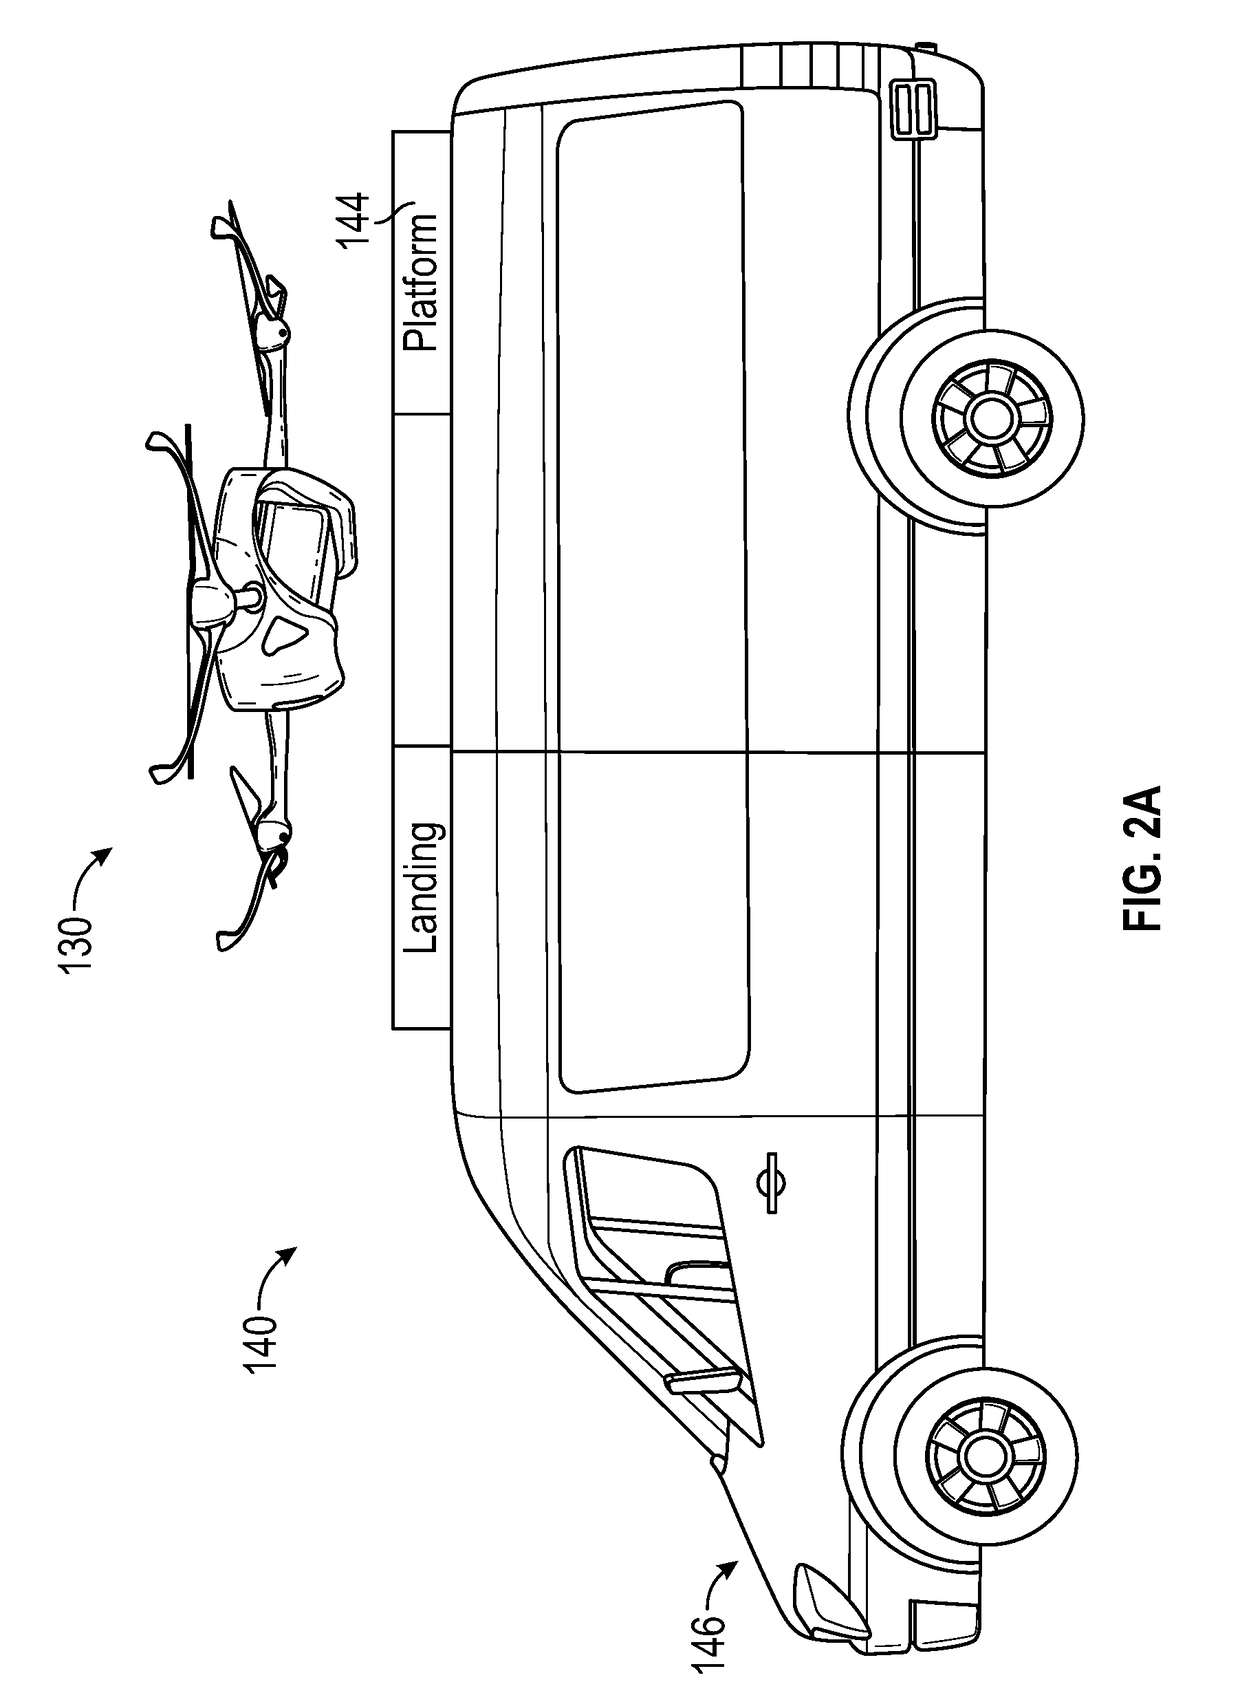 Methods and systems for transportation using unmanned aerial vehicles